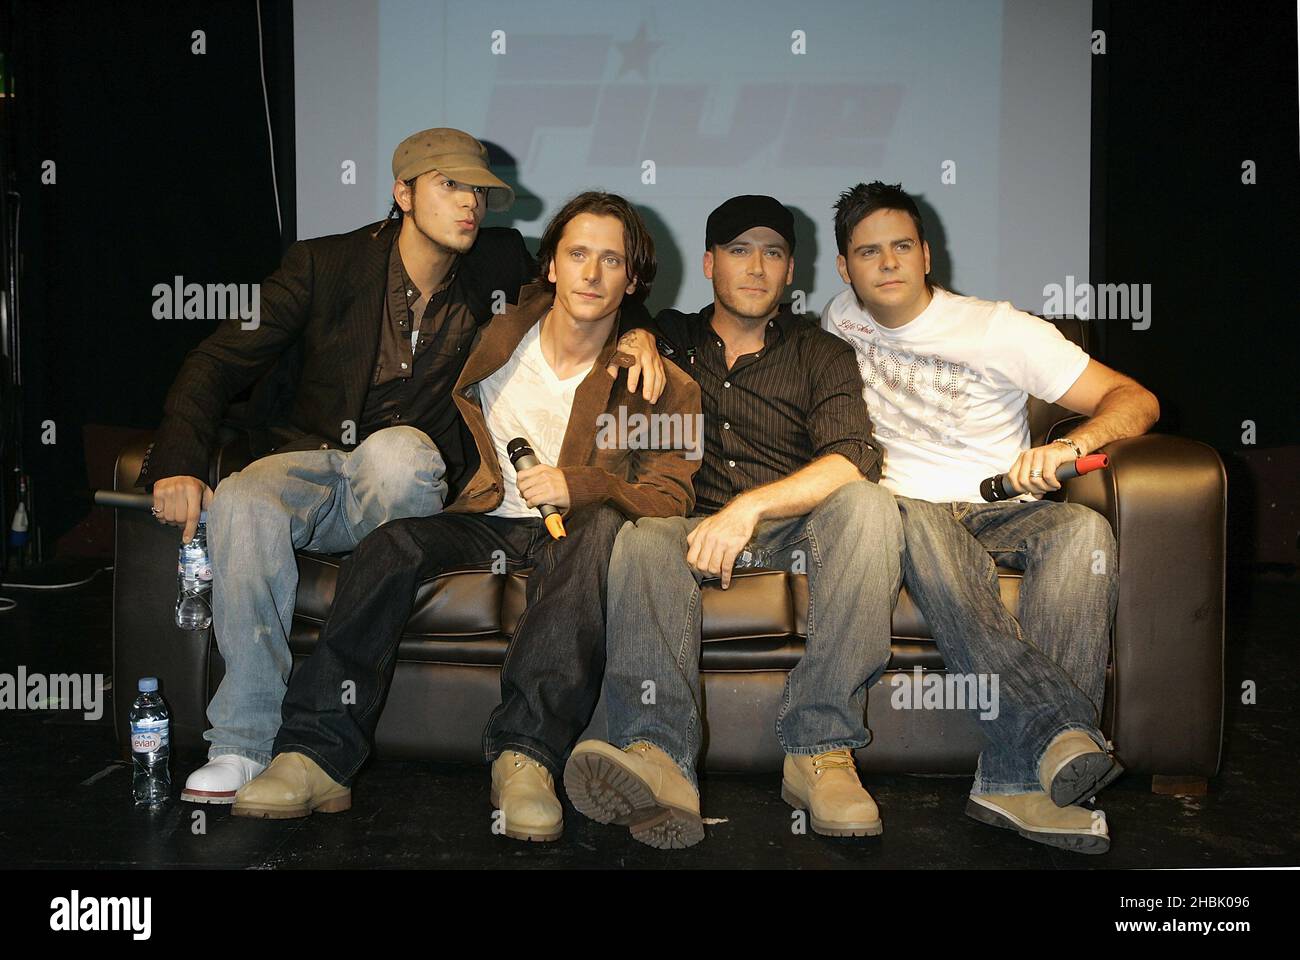 Pop band Five (from left to right) Abs (Richard Breen), Ritchie Neville, J (Jason 'J' Brown) and Scott Robinson - who now comprise four members - during a press conference to announce their reunion, at Bar Academy in Islington, north London. Stock Photo